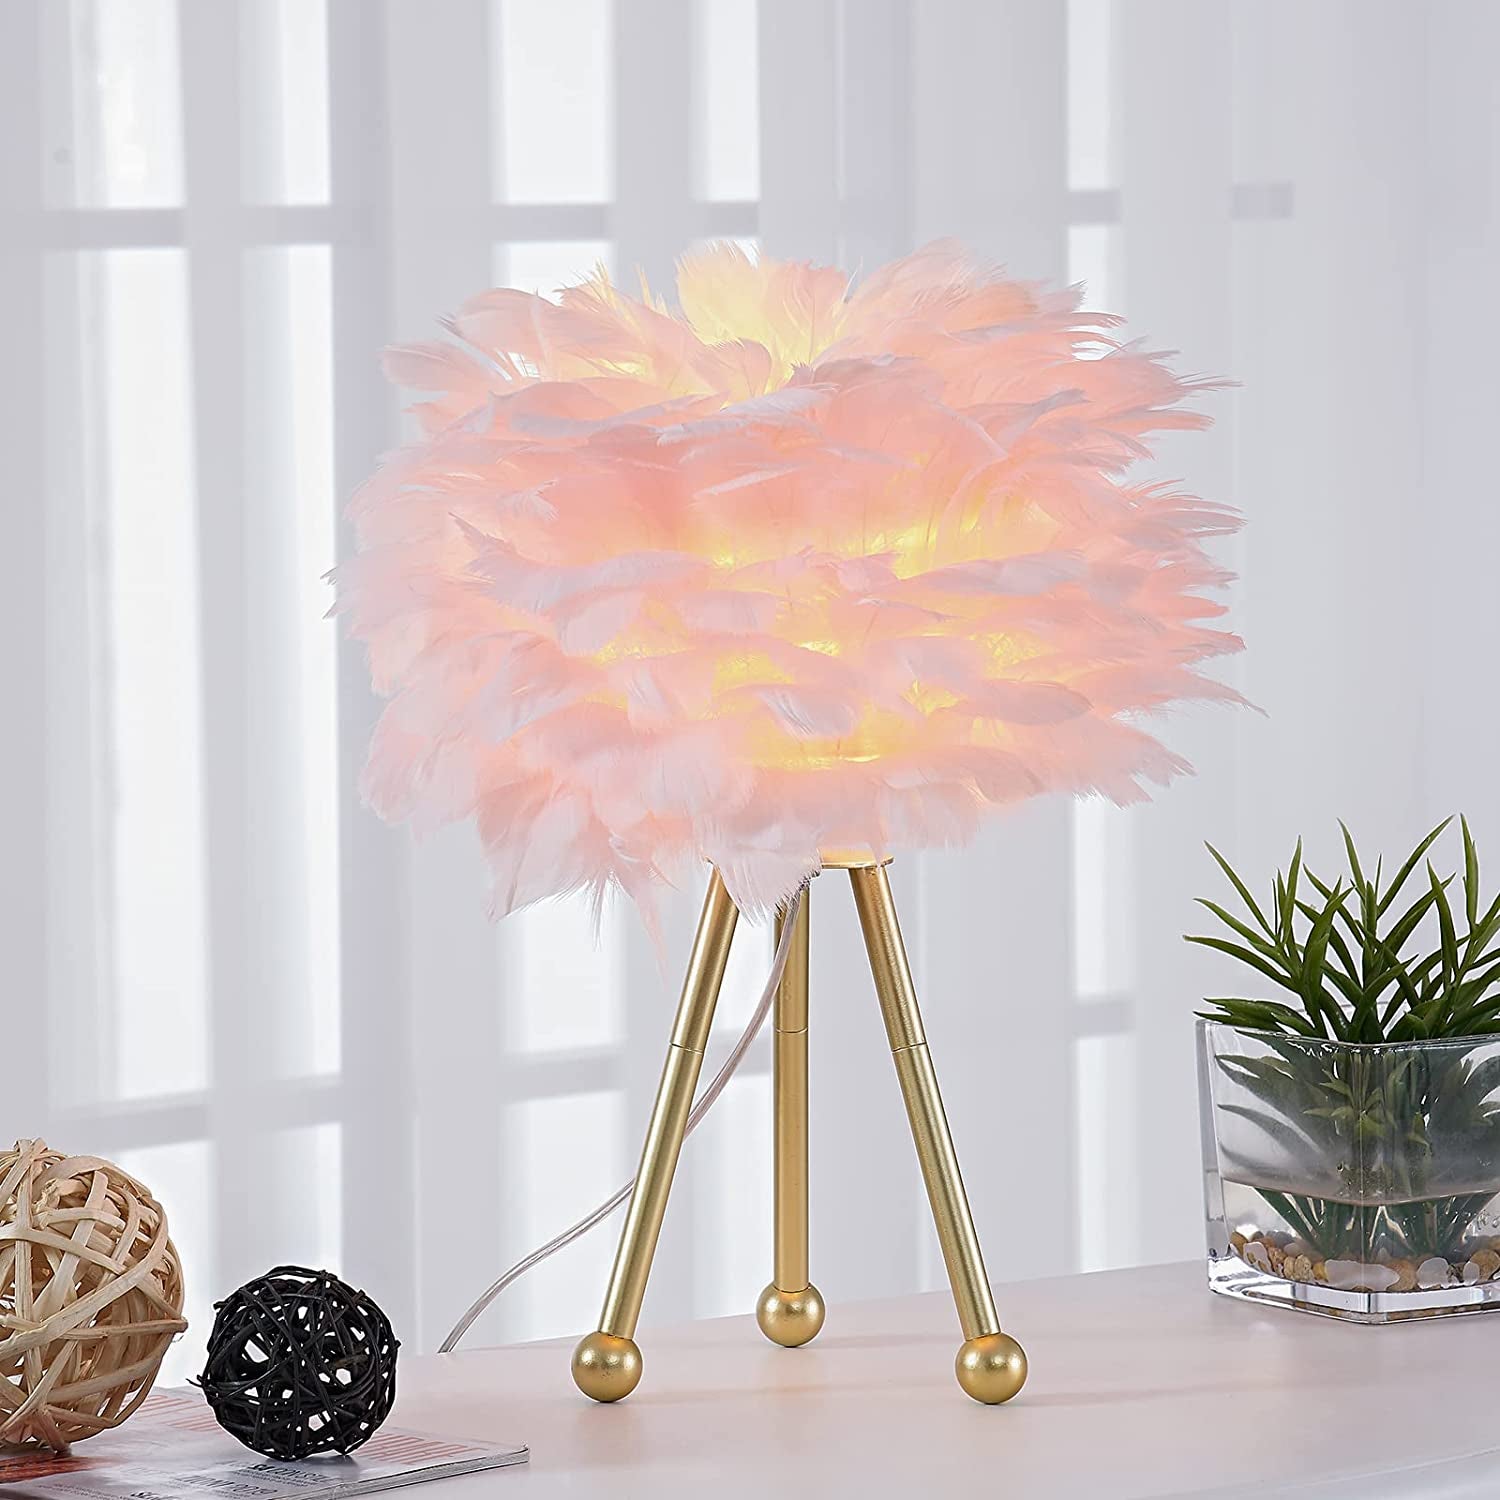 Maxax Tripod Table Lamp, Pink Feather Bedside Lamp, Nightstand Lamp with Gold Finish for Bedrooms/Living Room/Dining Room/Kitchen, 14.5 Inches